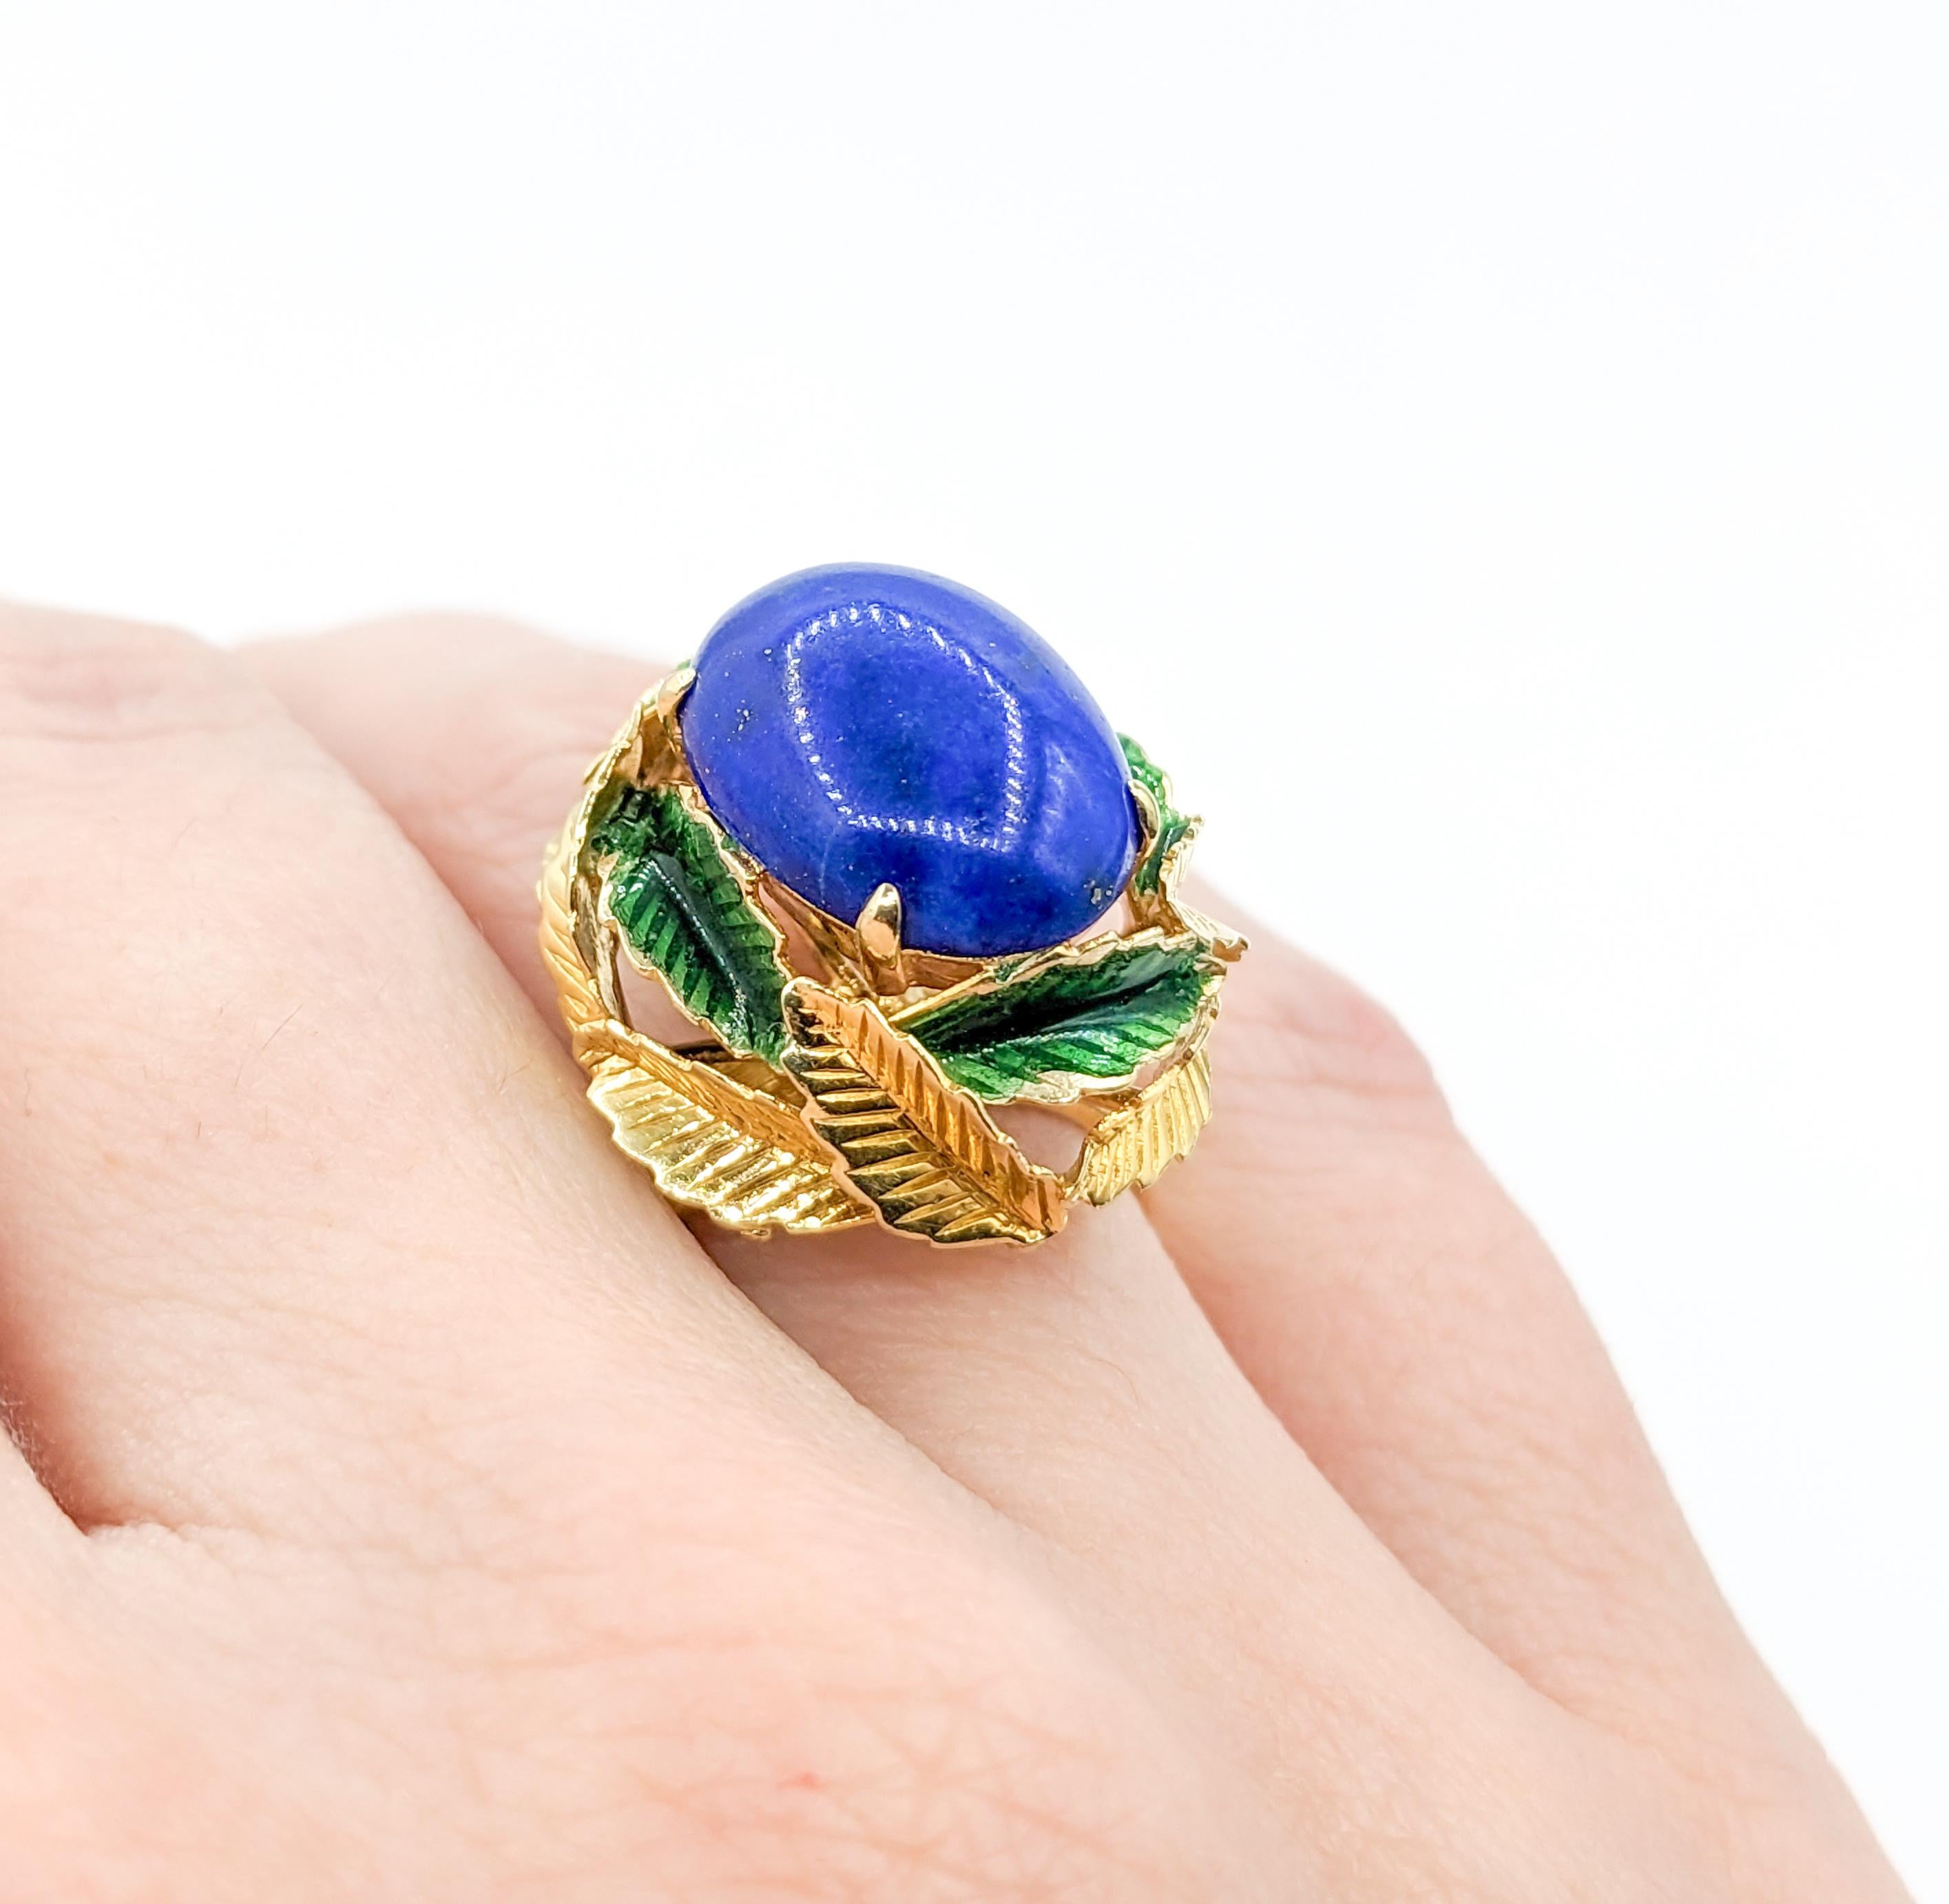  Lapis Cabochon Ring with Enamel Leaf Details In Excellent Condition For Sale In Bloomington, MN